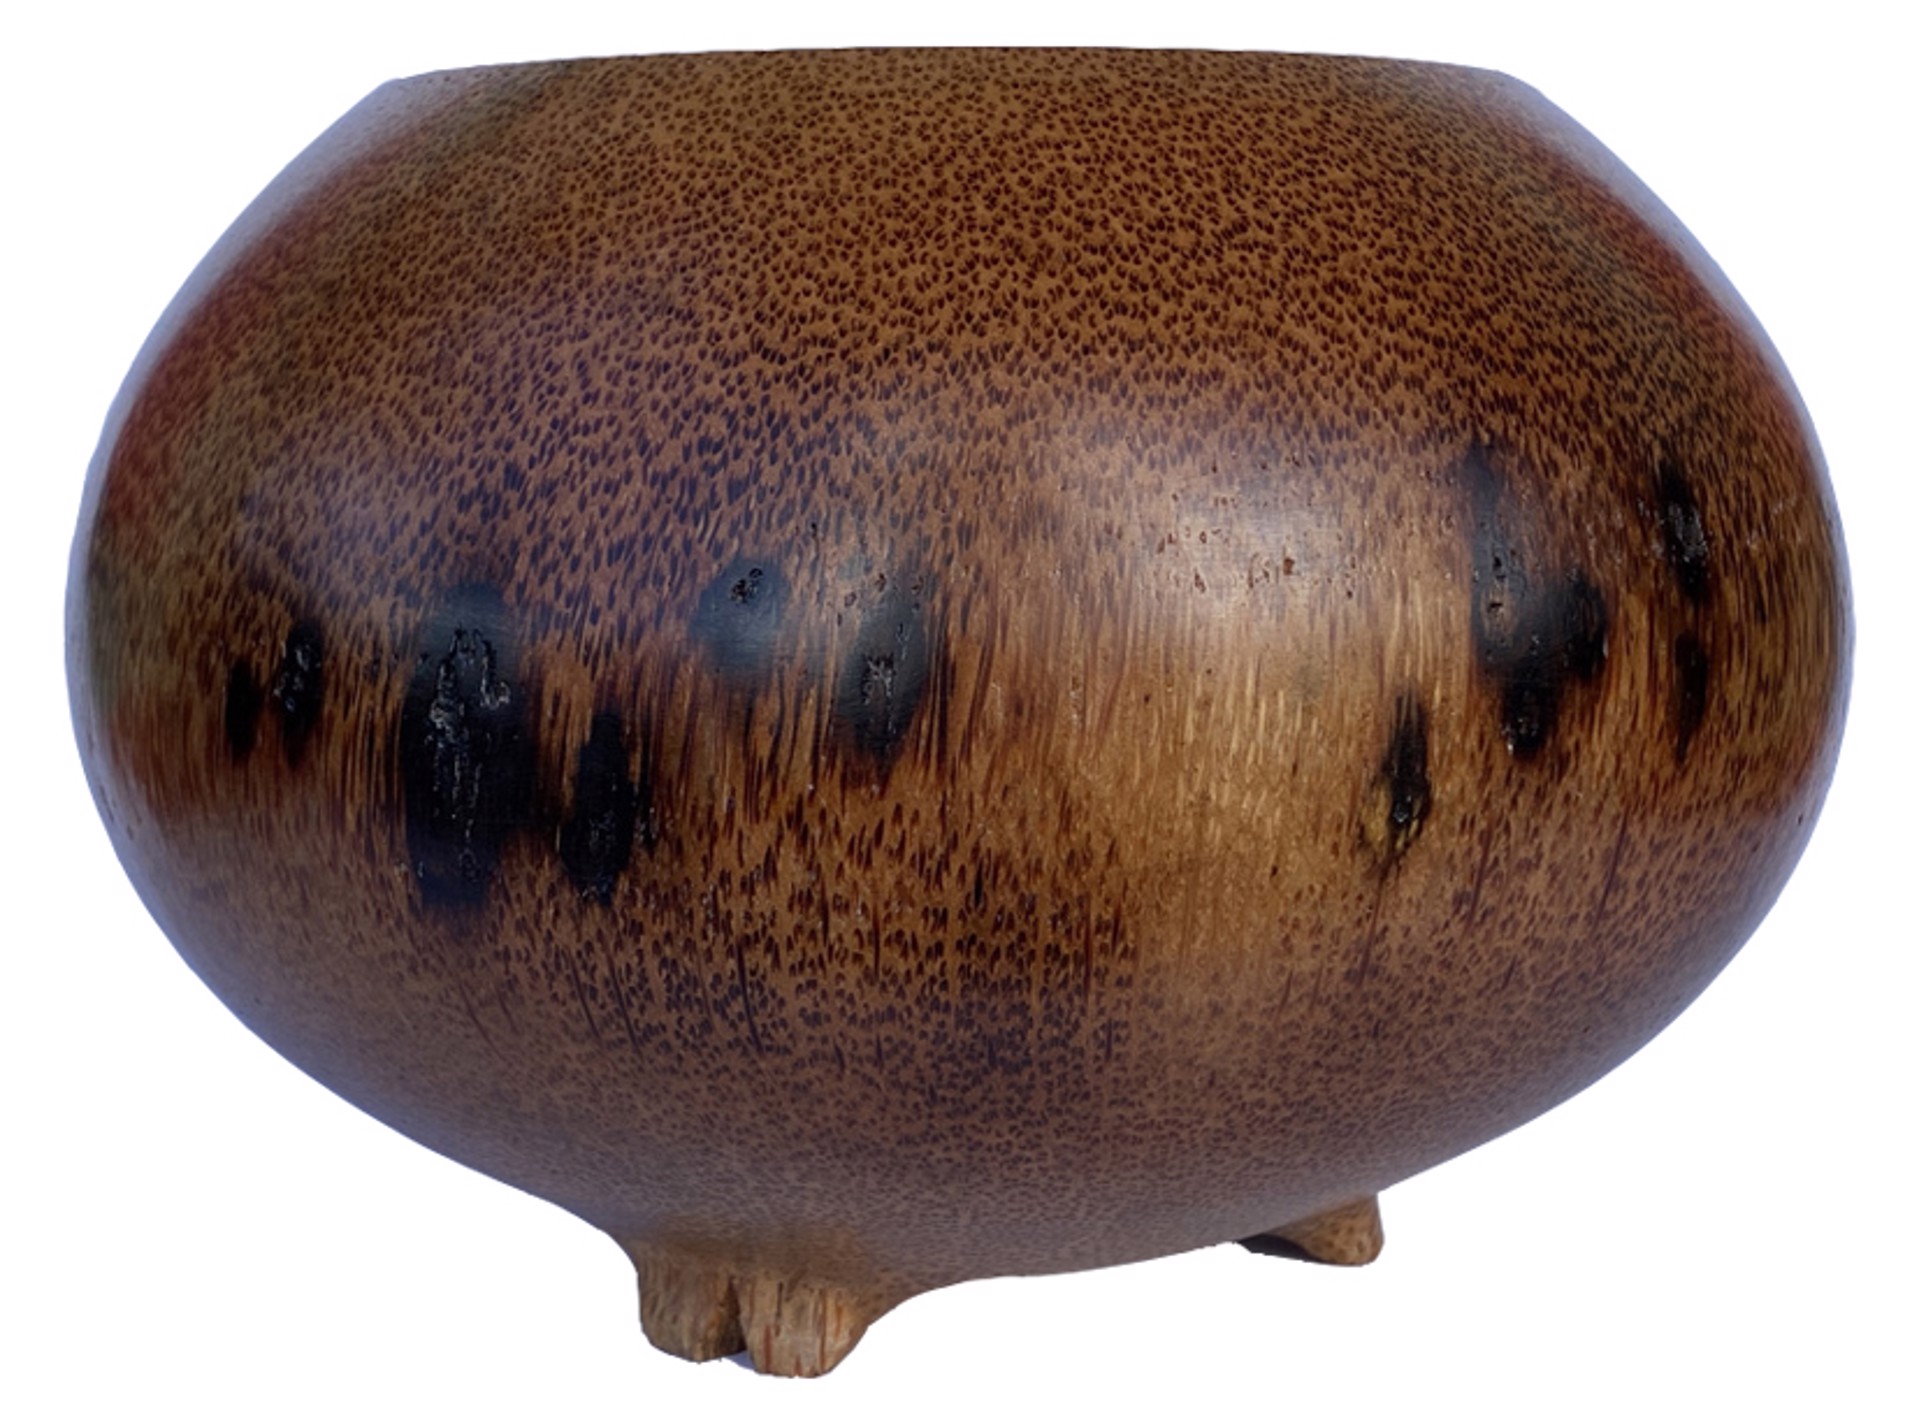 Spiked Brown Coconut Vessel with Feet by John Fackrell